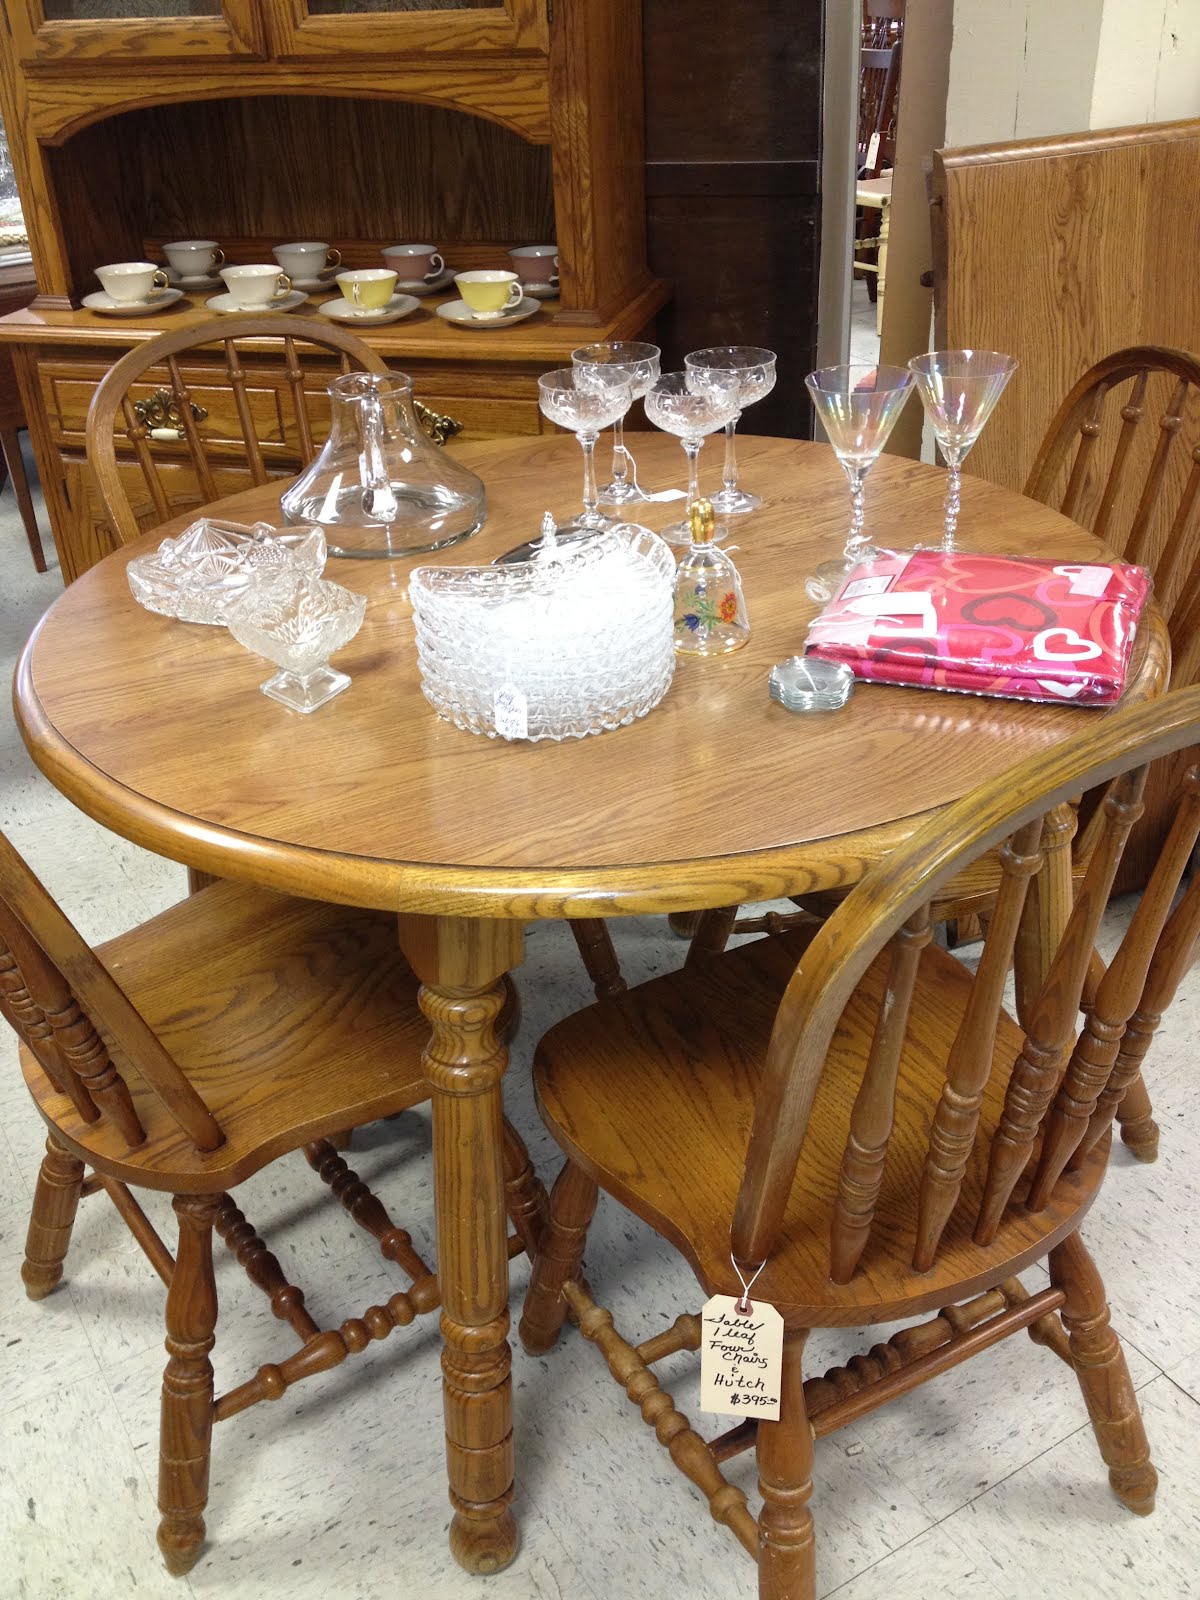 C Dianne Zweig Kitsch N Stuff Buying A Used Dinette Set For